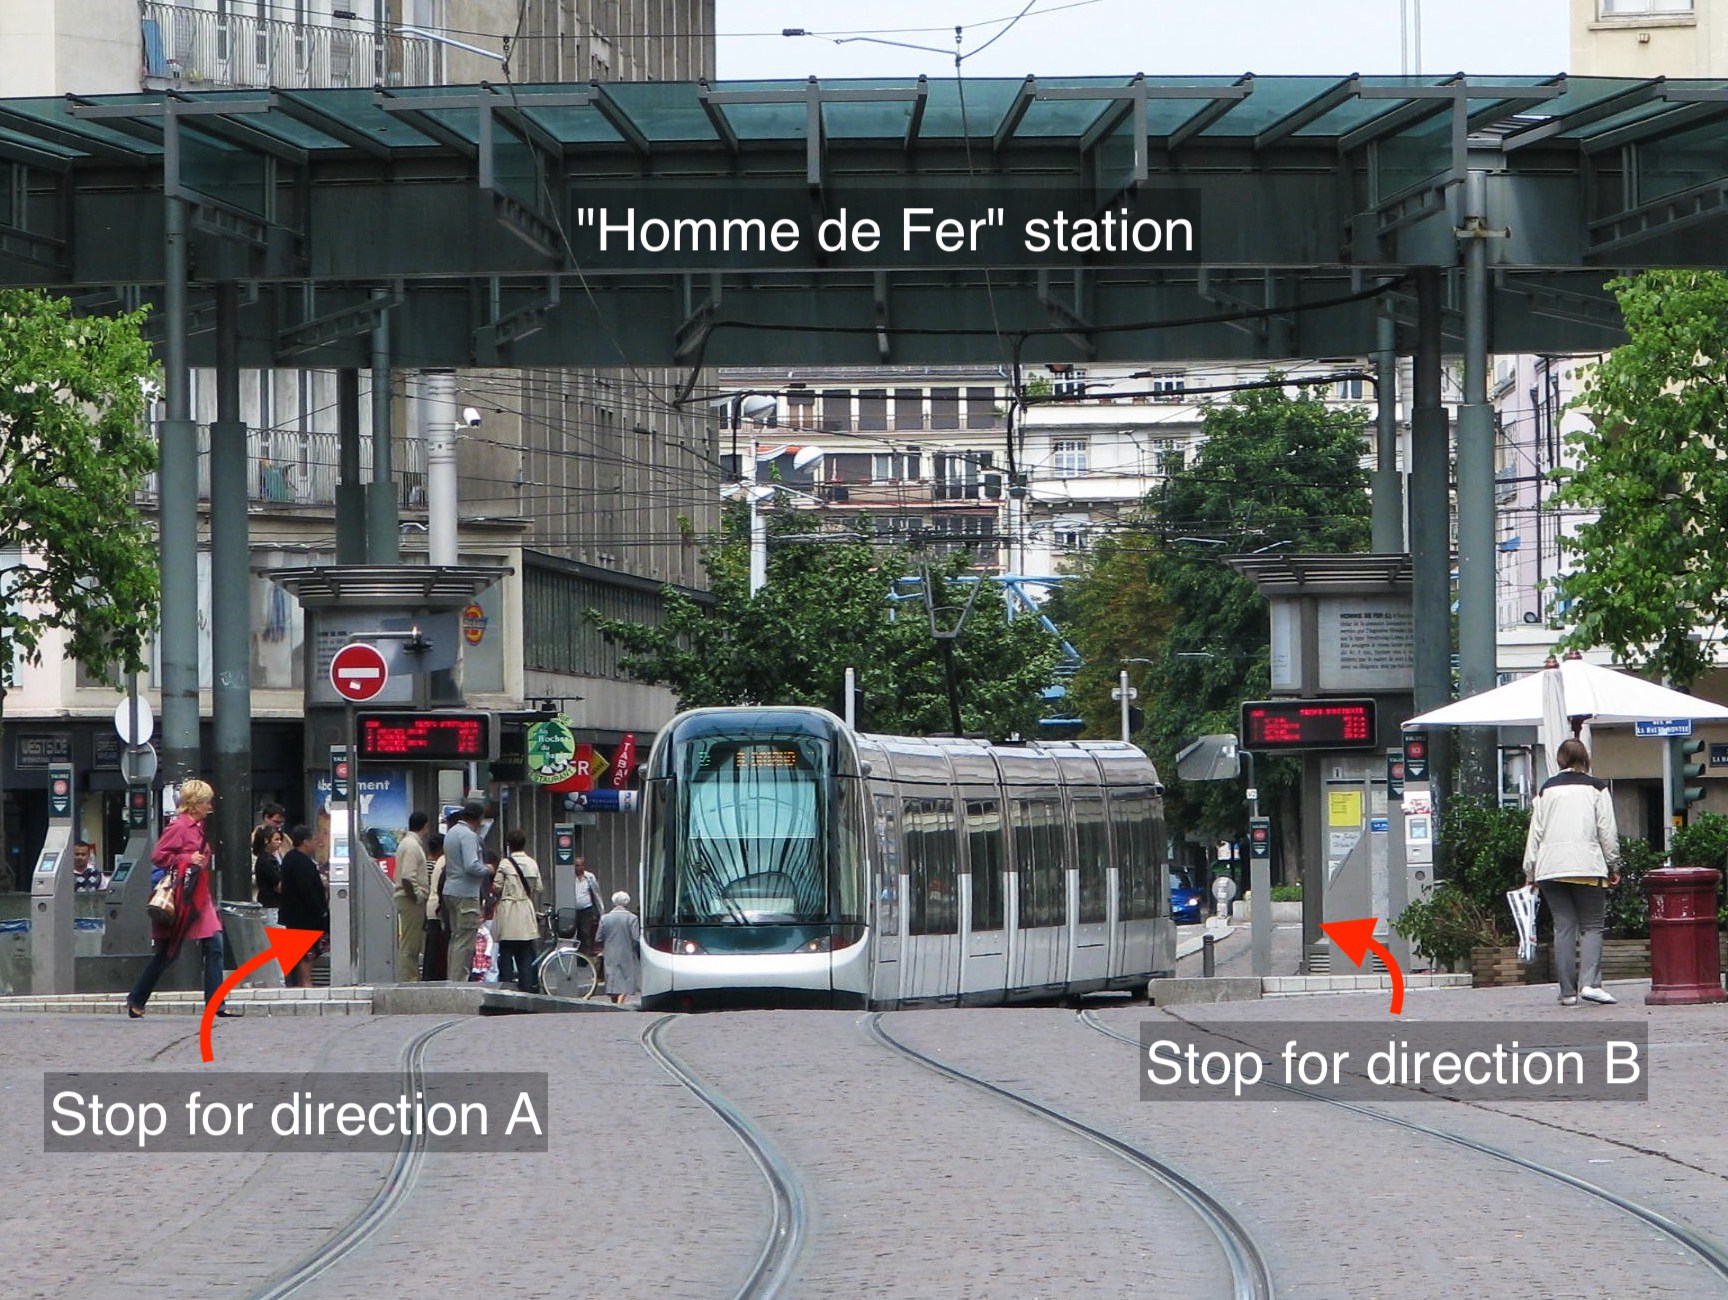 Photo of the "Homme de Fer" tram station, with a stop on each side of the tram tracks, one for each tram direction